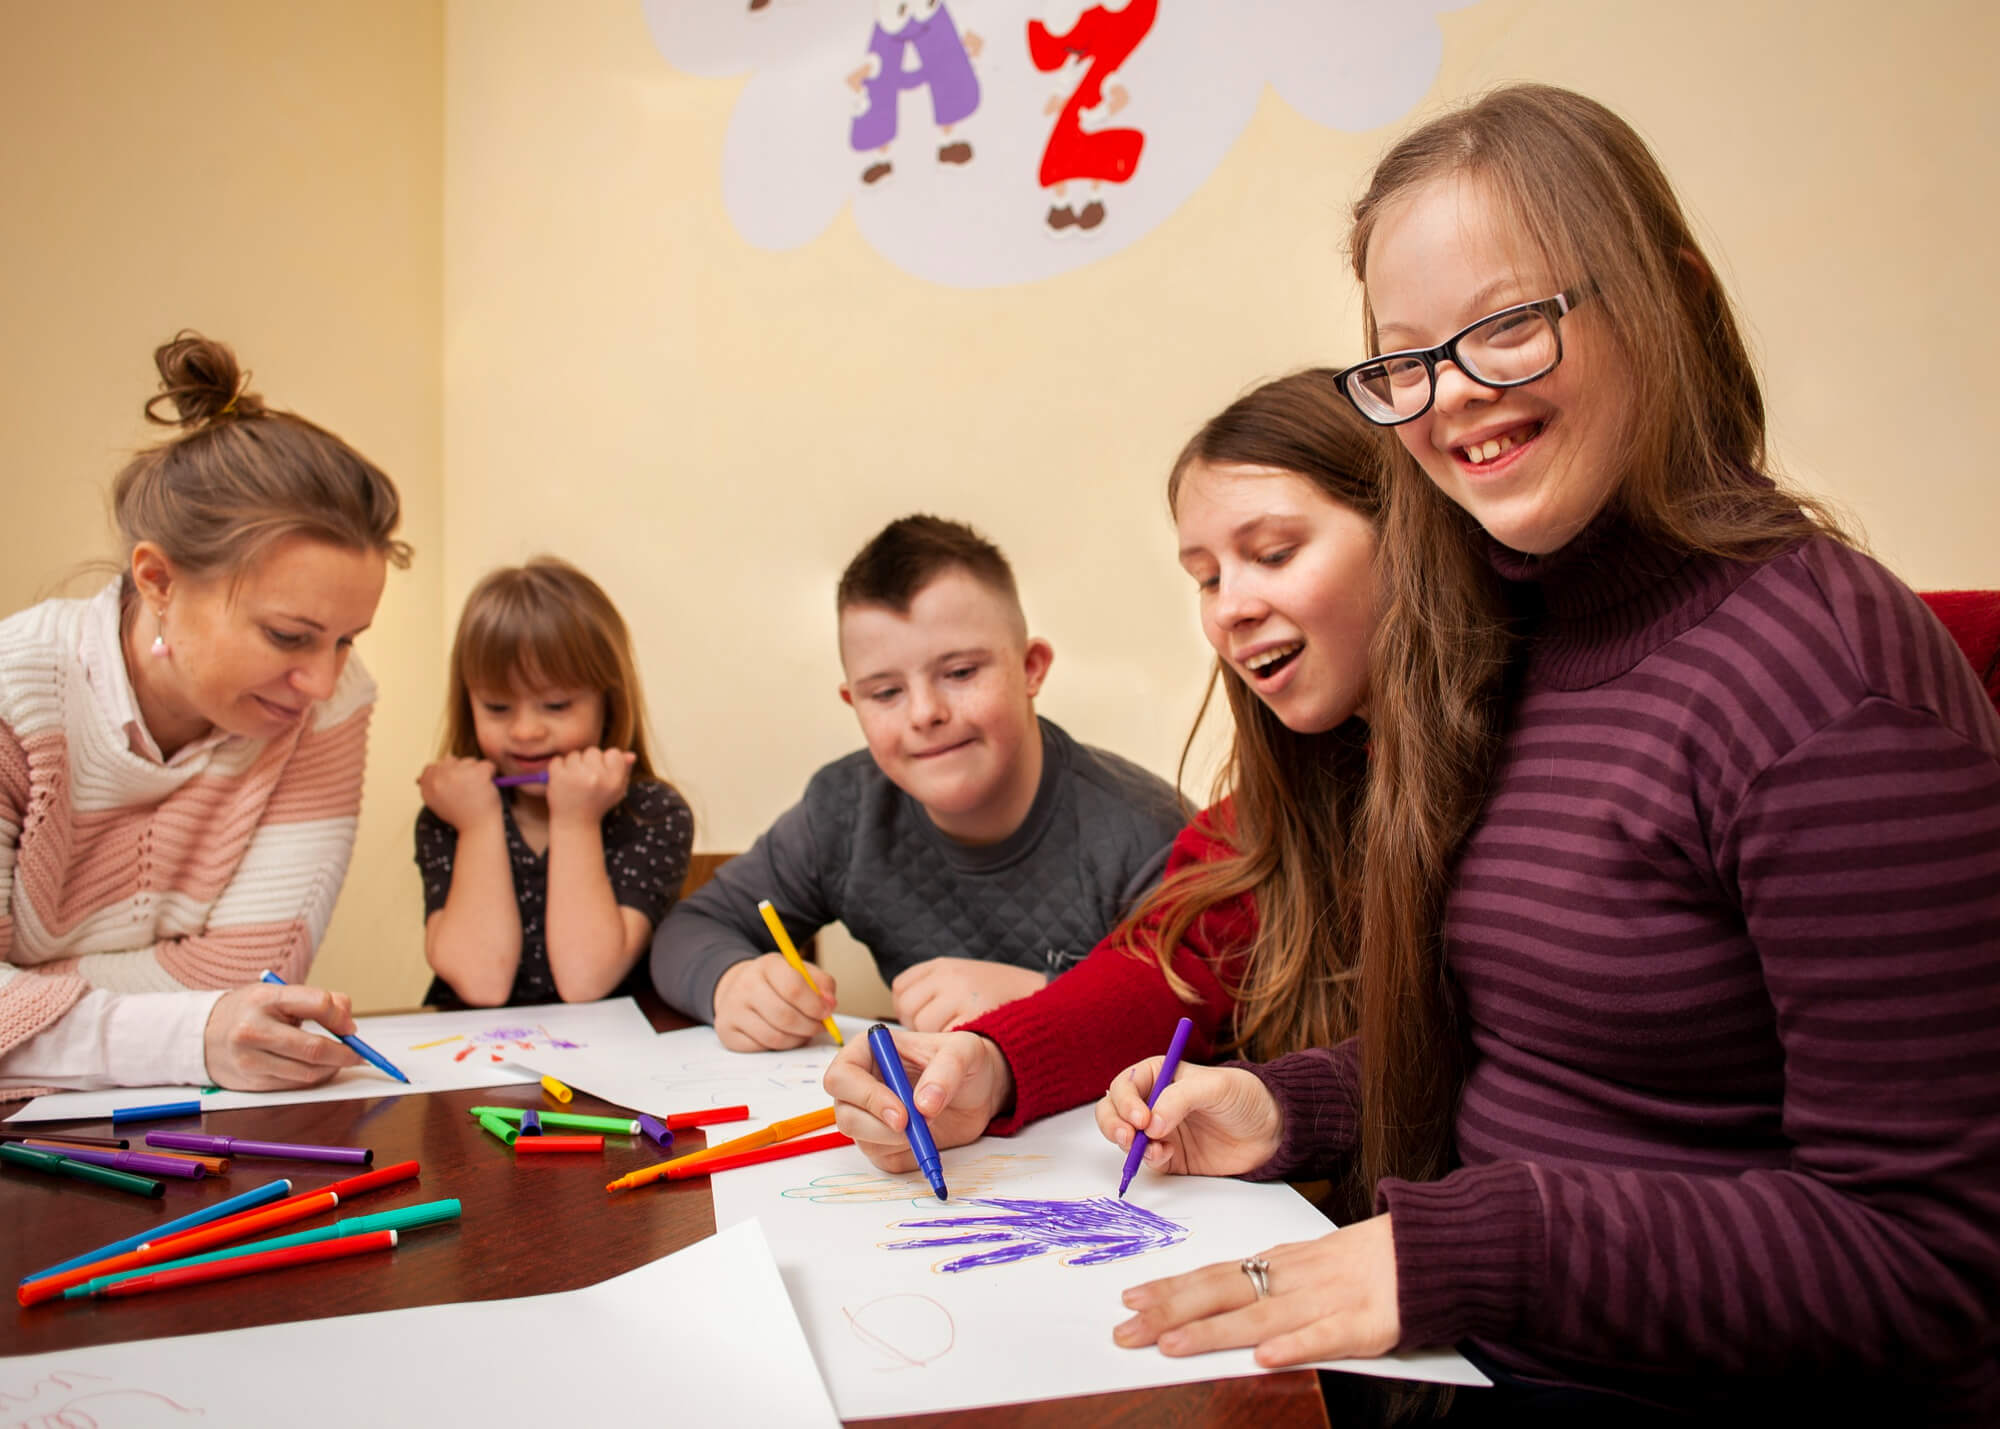 Happy girl with down syndrome posing while drawing